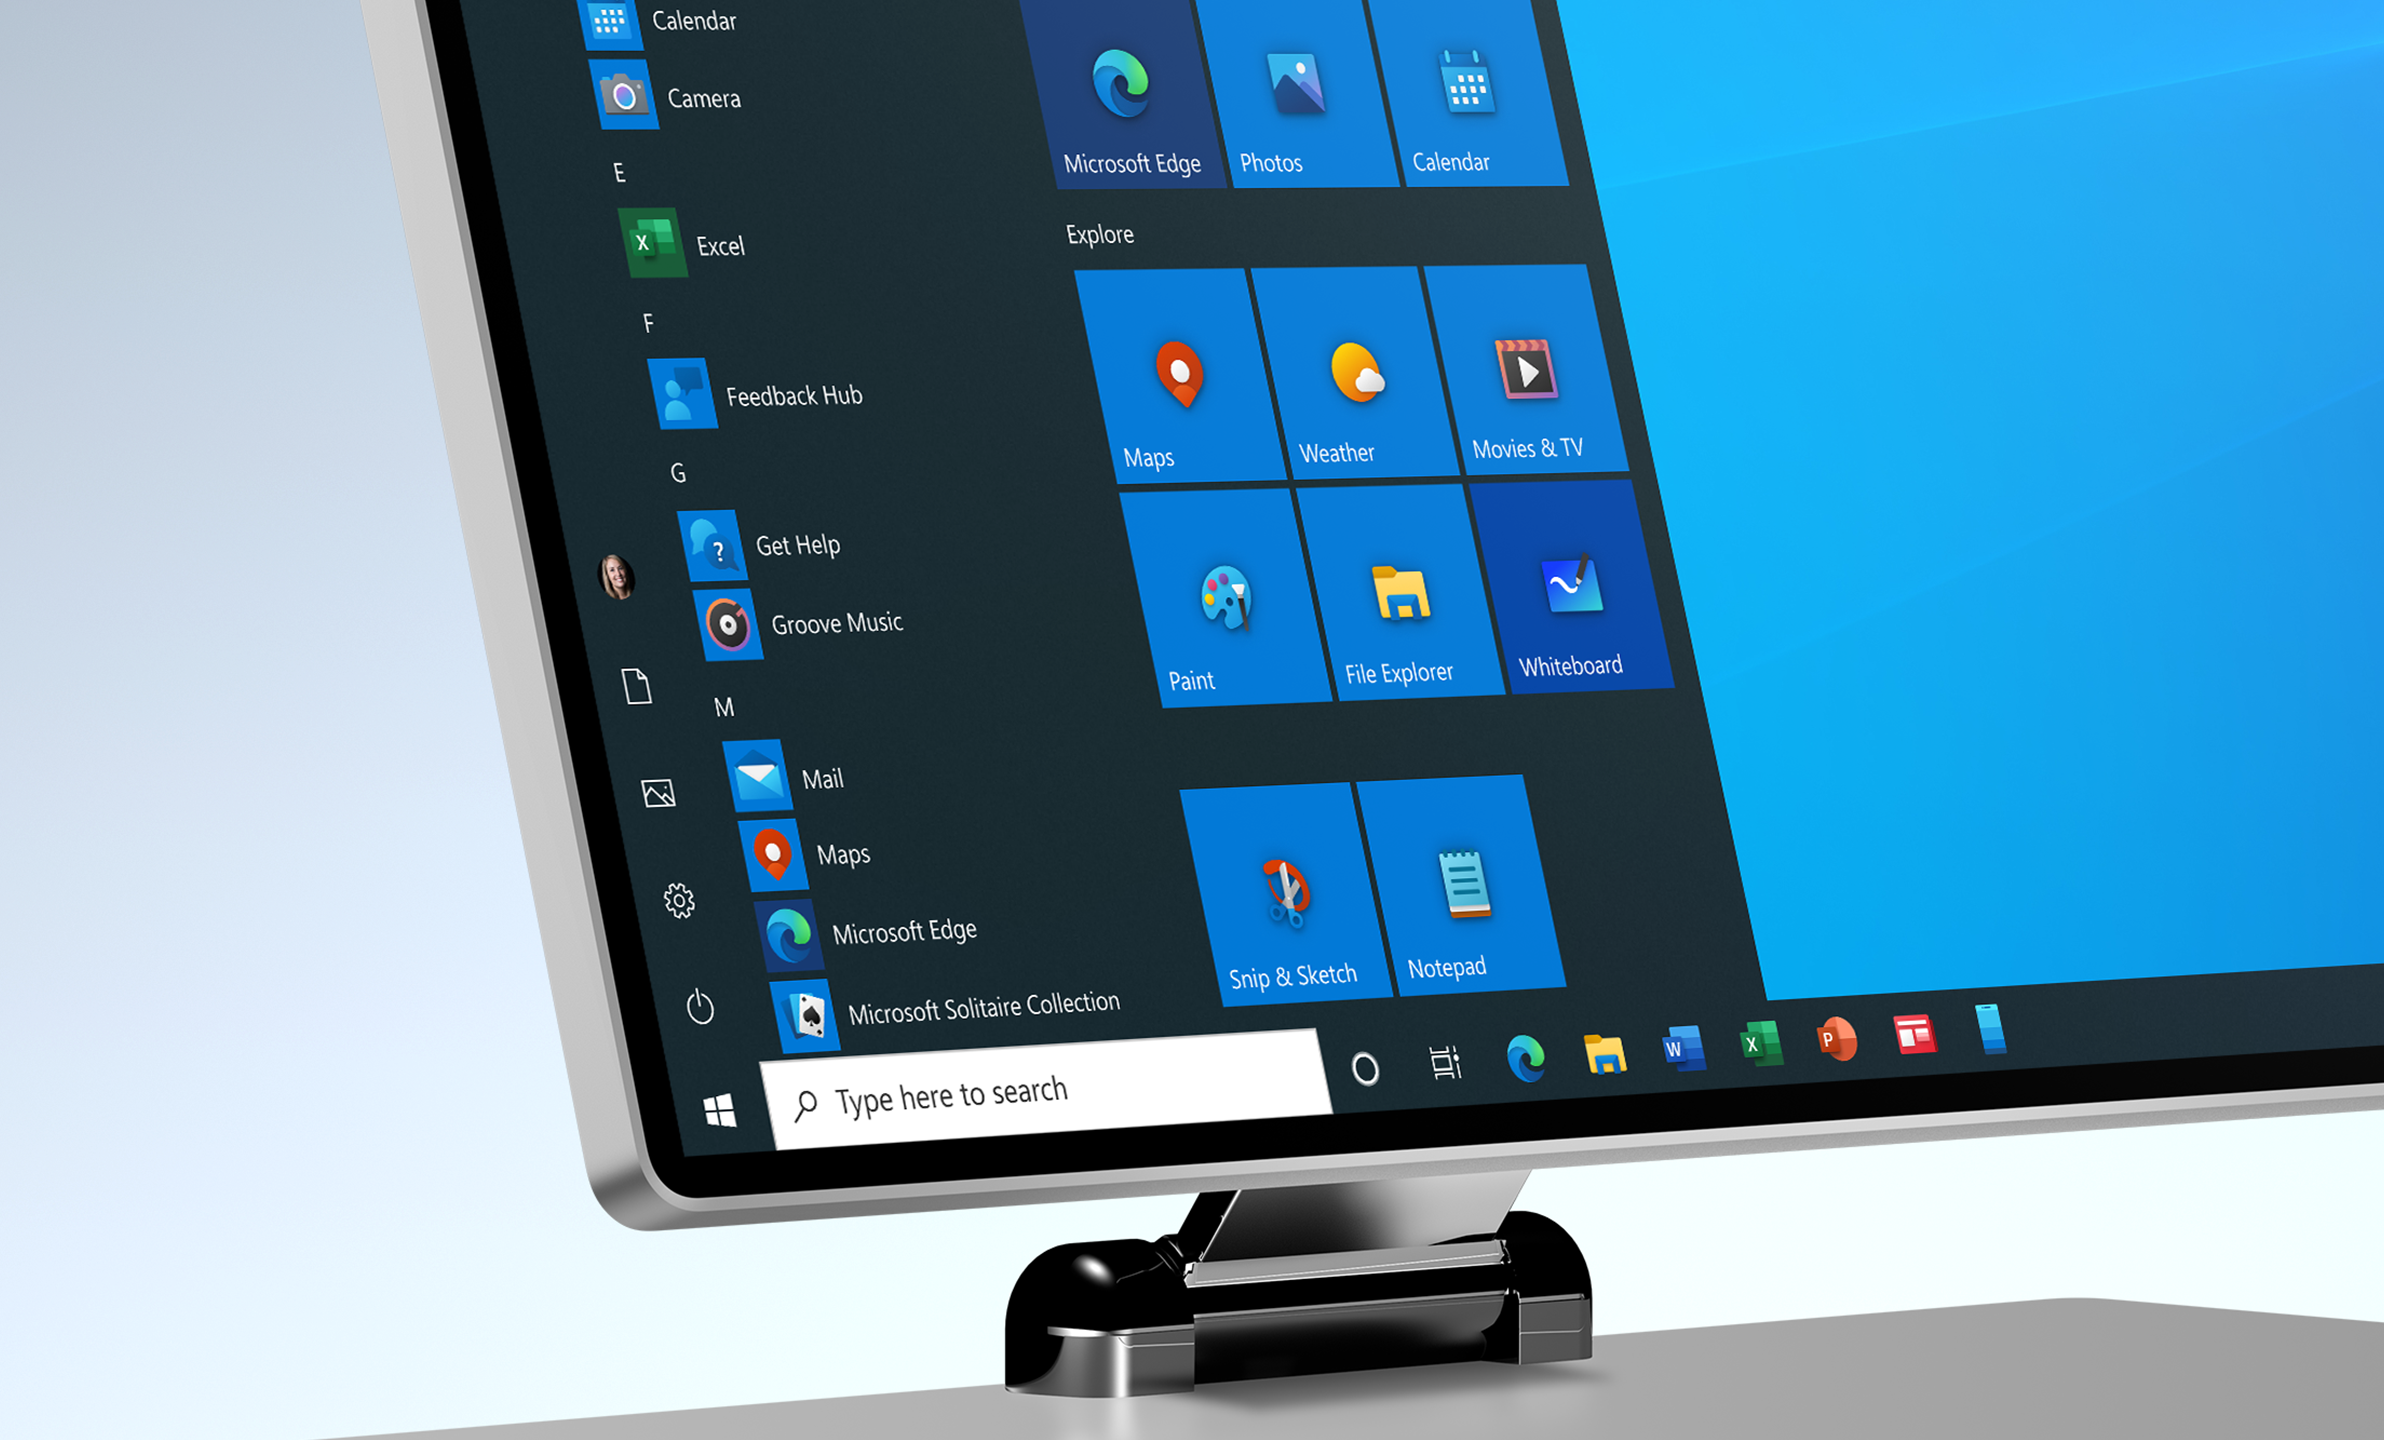 The Windows 10 Start menu showing many of the newly designed icons for the built-in apps.